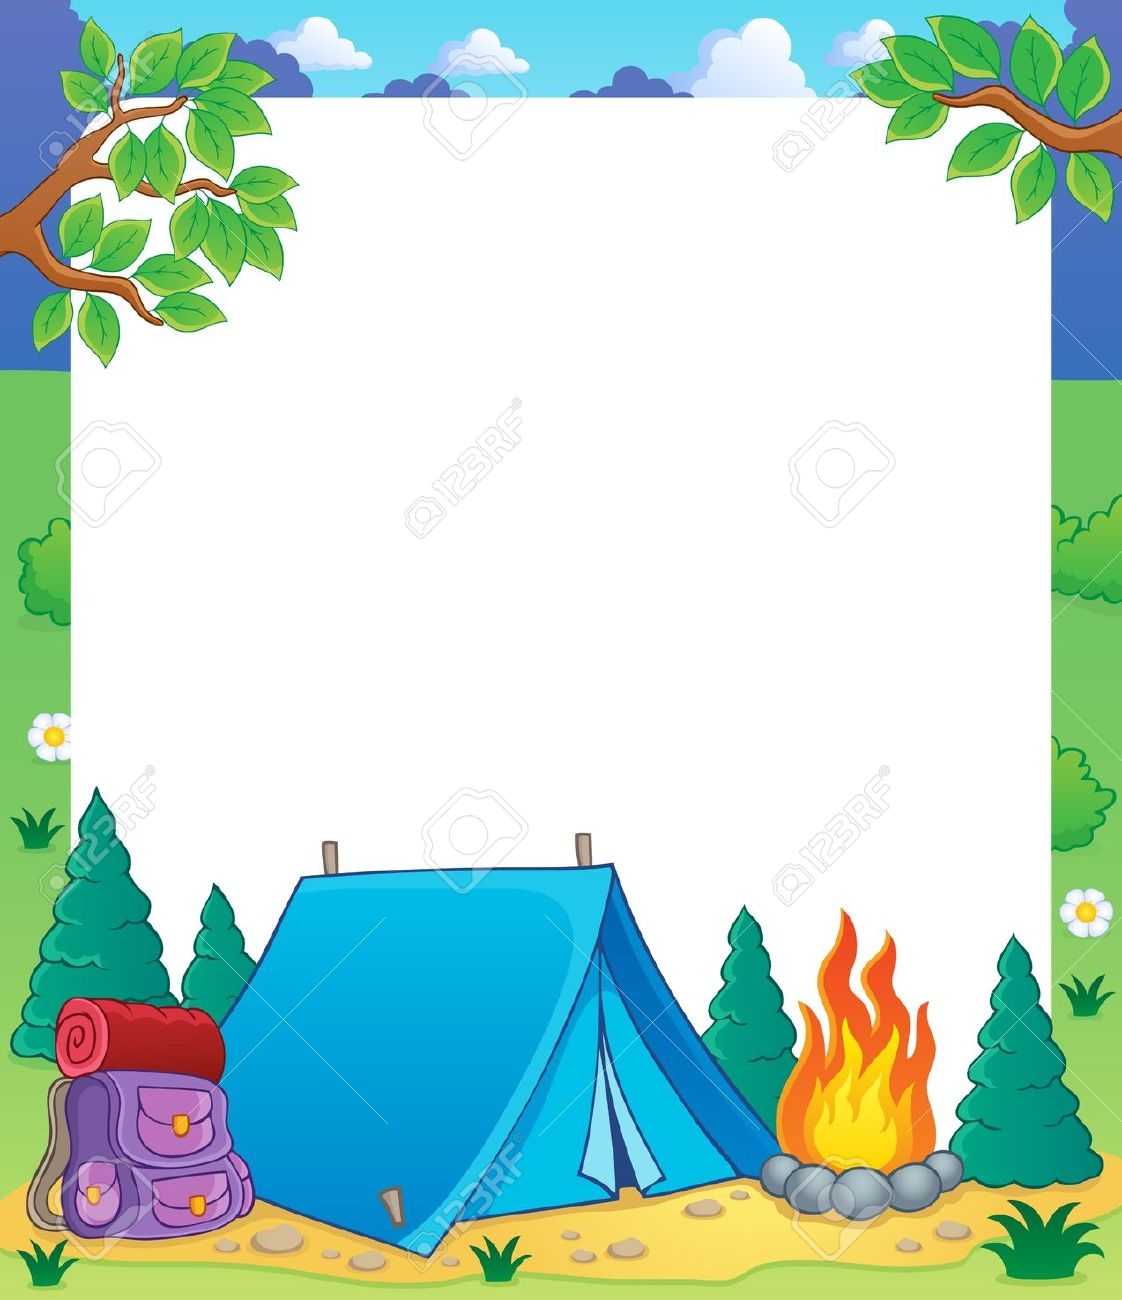 Free Camping Clipart Borders - Free Camping Clip Art